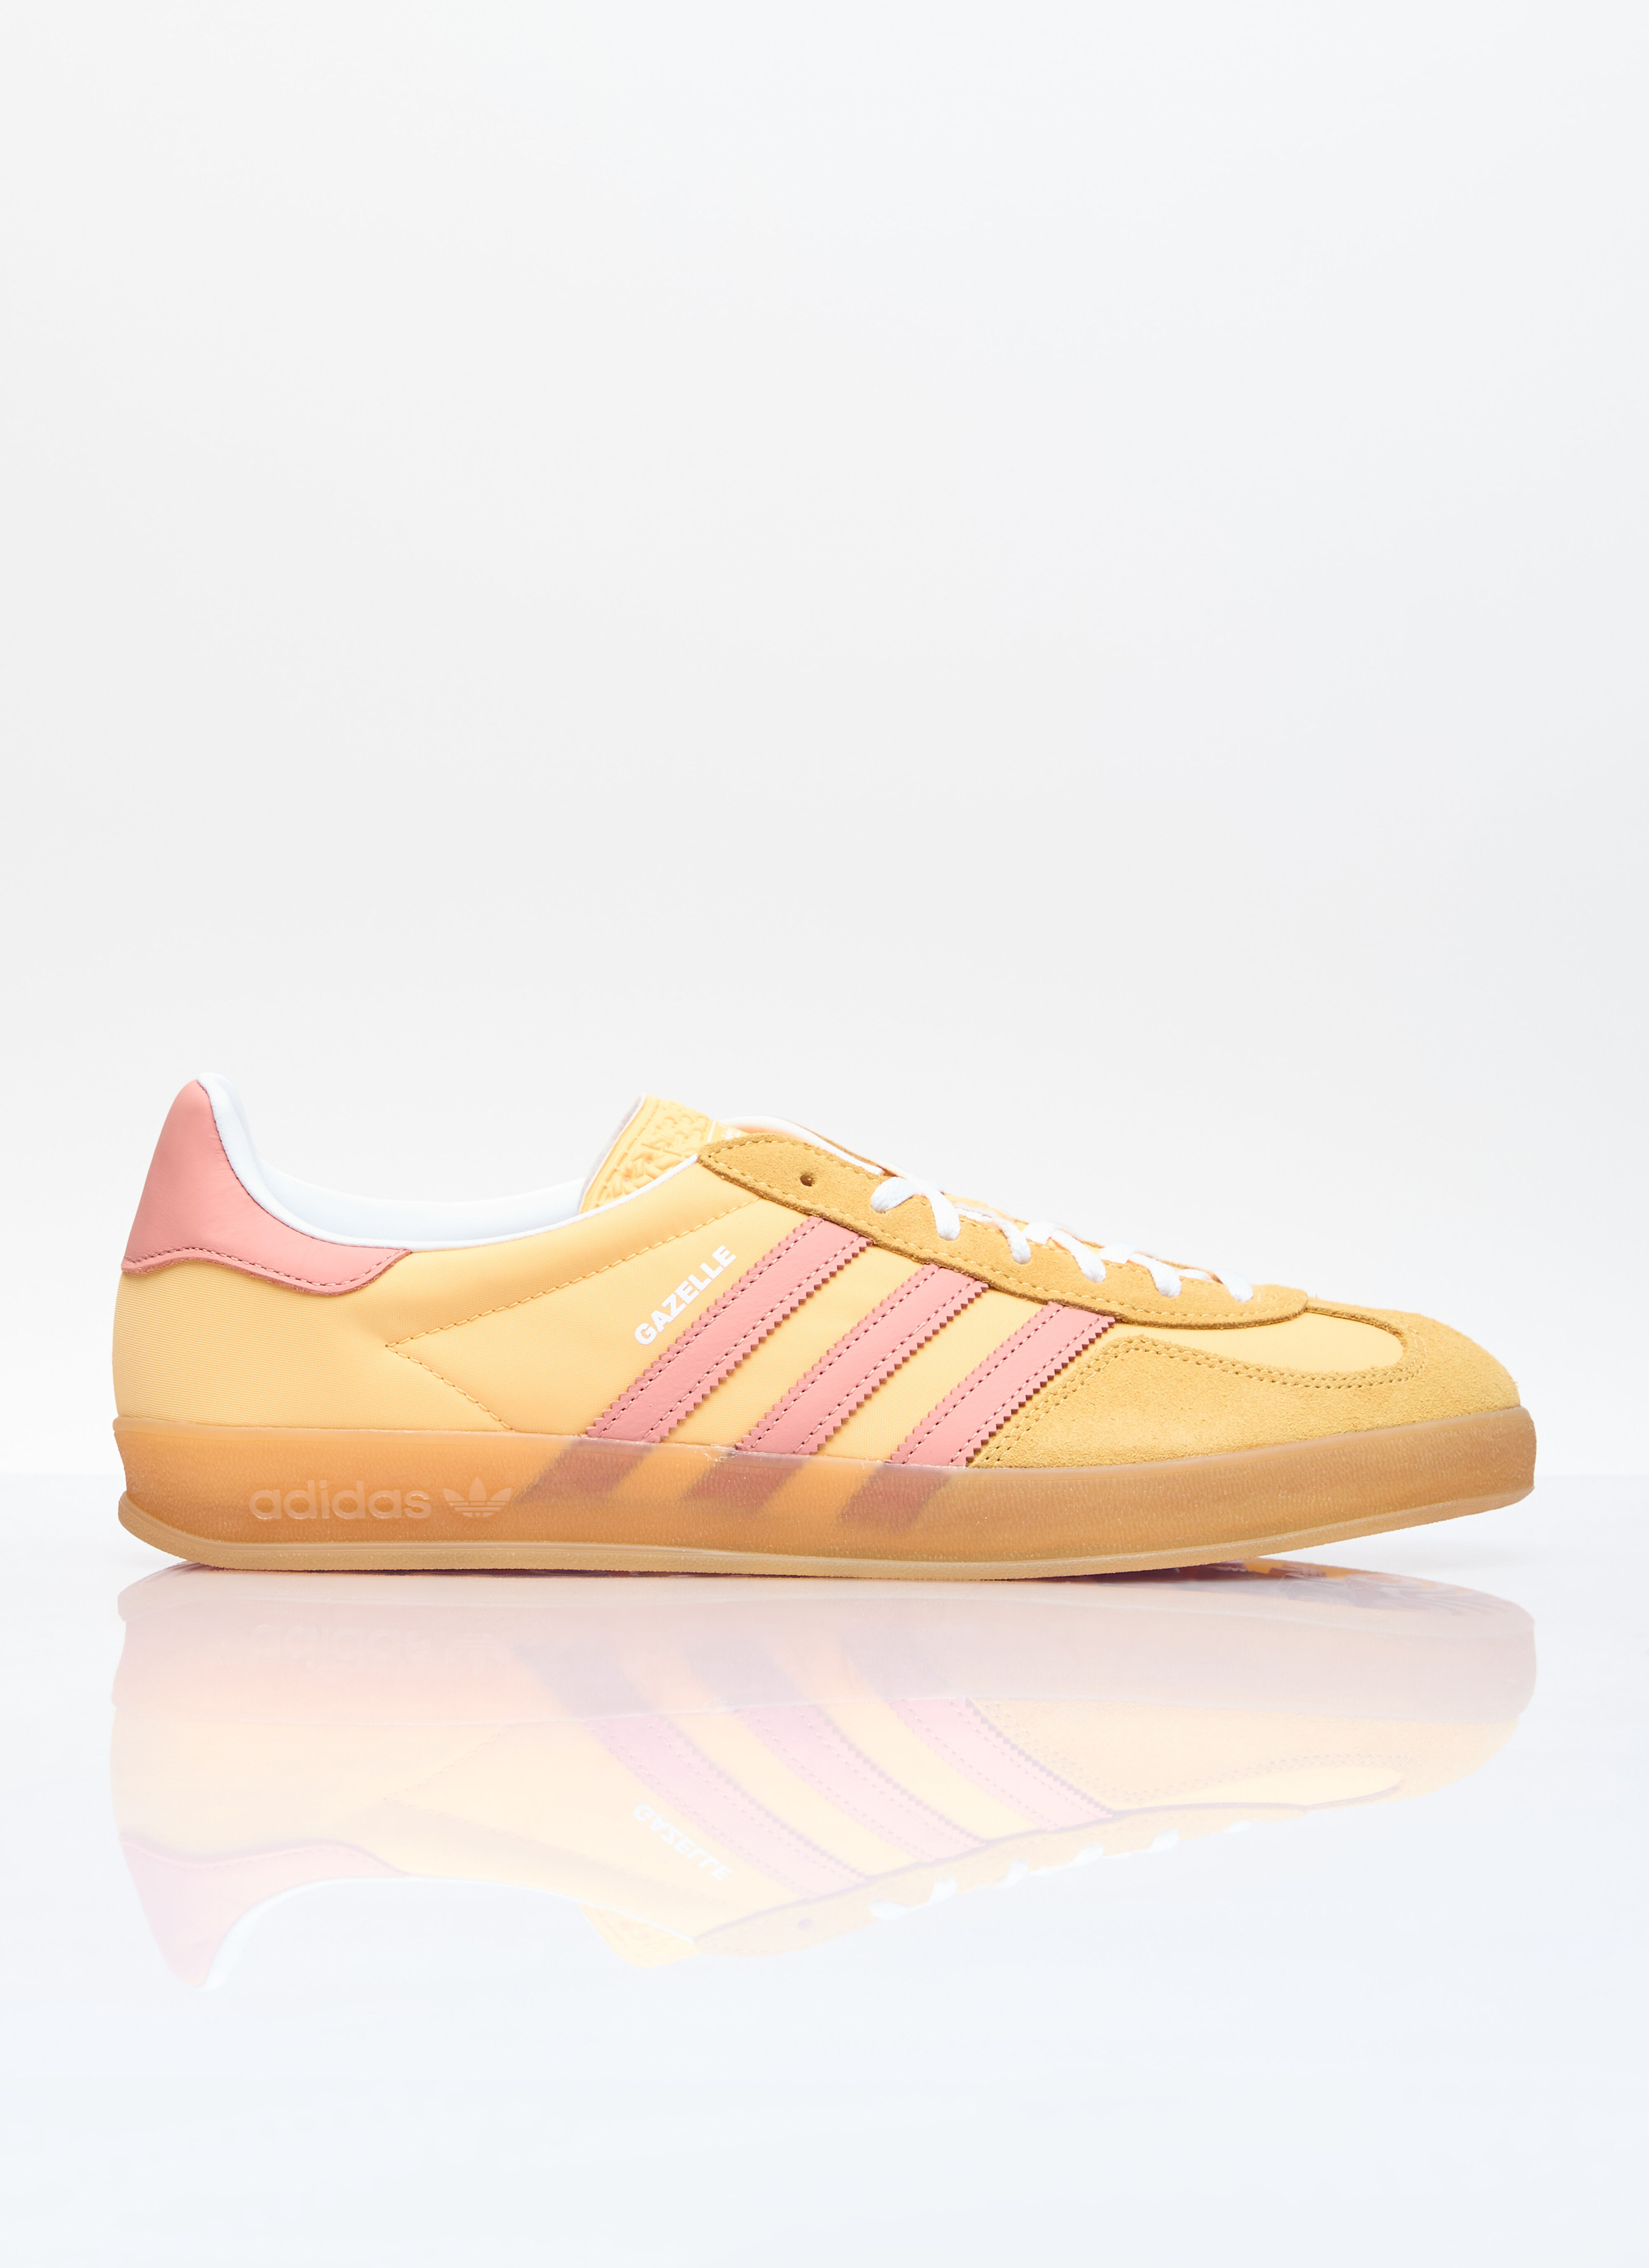 adidas by Wales Bonner Gazelle Indoor Sneakers Yellow awb0357010